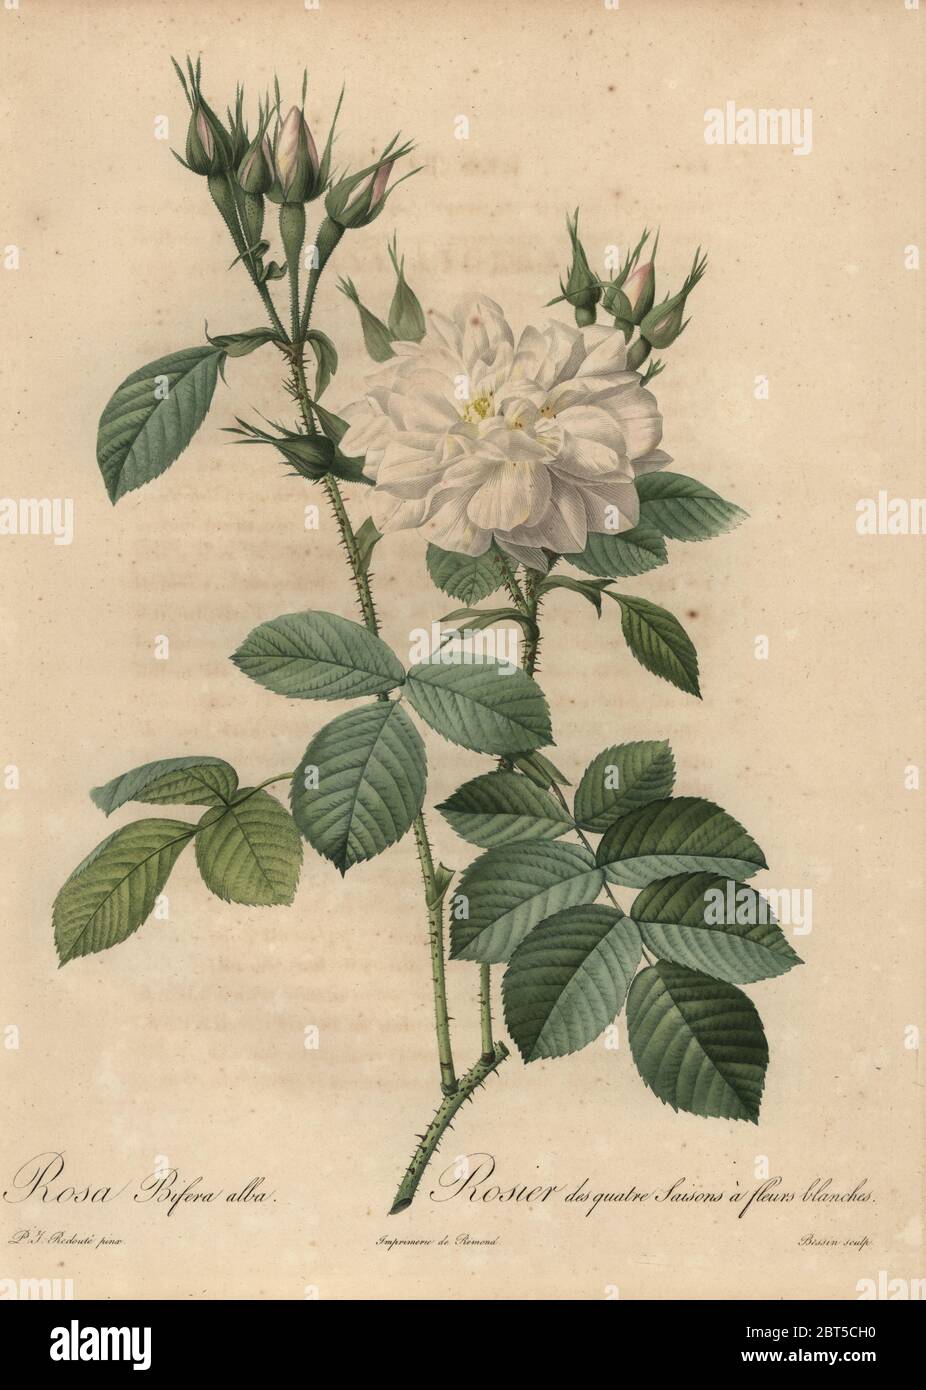 White rose, Rosa bifera alba, Rosier des quatre Saisons a fleurs blanches. Stipple copperplate engraving by Rosine-Antoinette Bessin handcoloured a la poupee after a botanical illustration by Pierre-Joseph Redoute from the first folio edition of Les Roses, Firmin Didot, Paris, 1817. Stock Photo